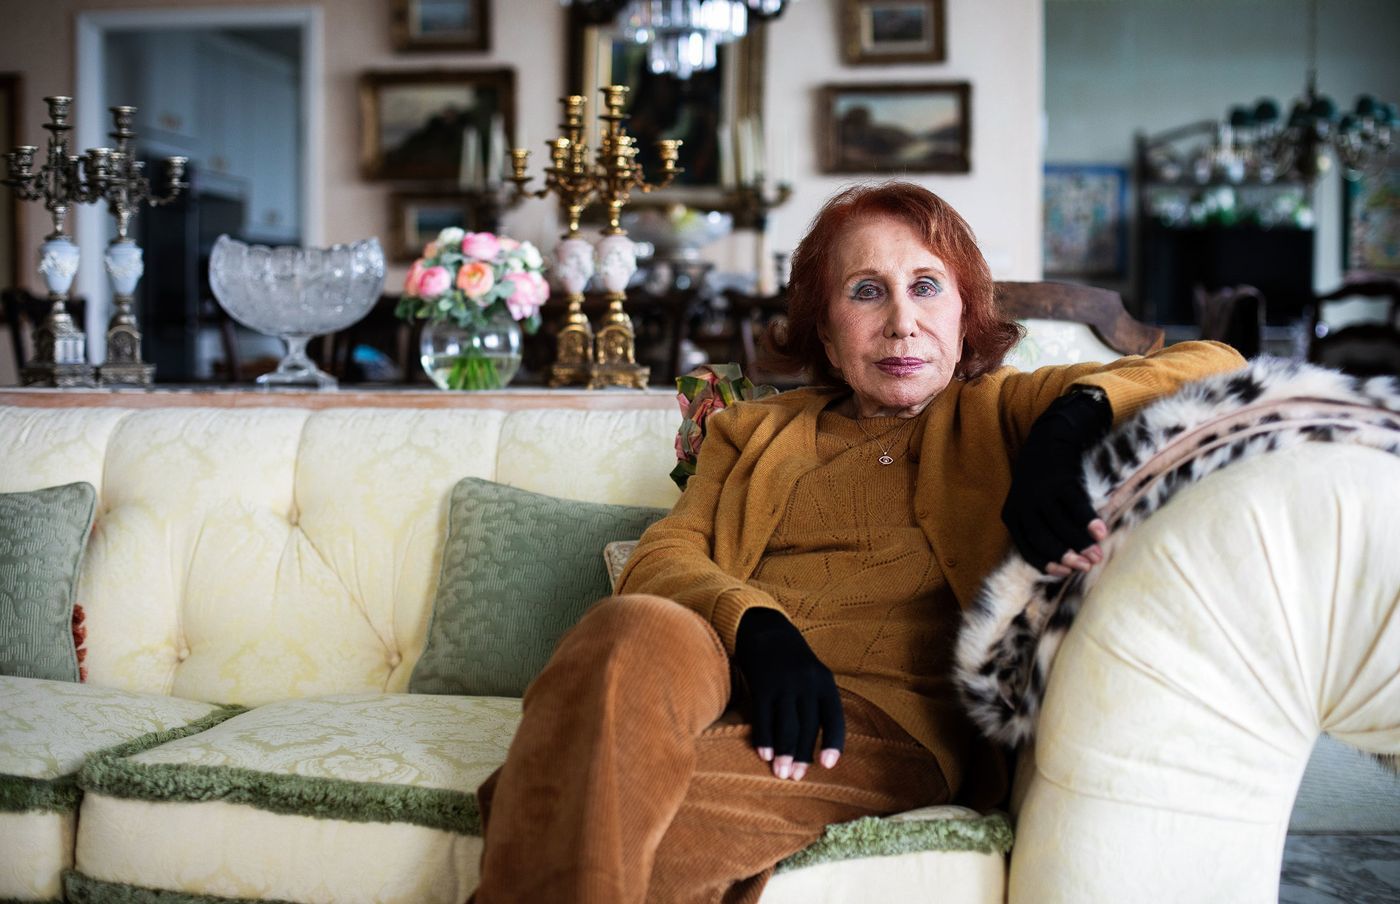 At 93, She Waged War on JPMorgan - and Her Own Grandsons